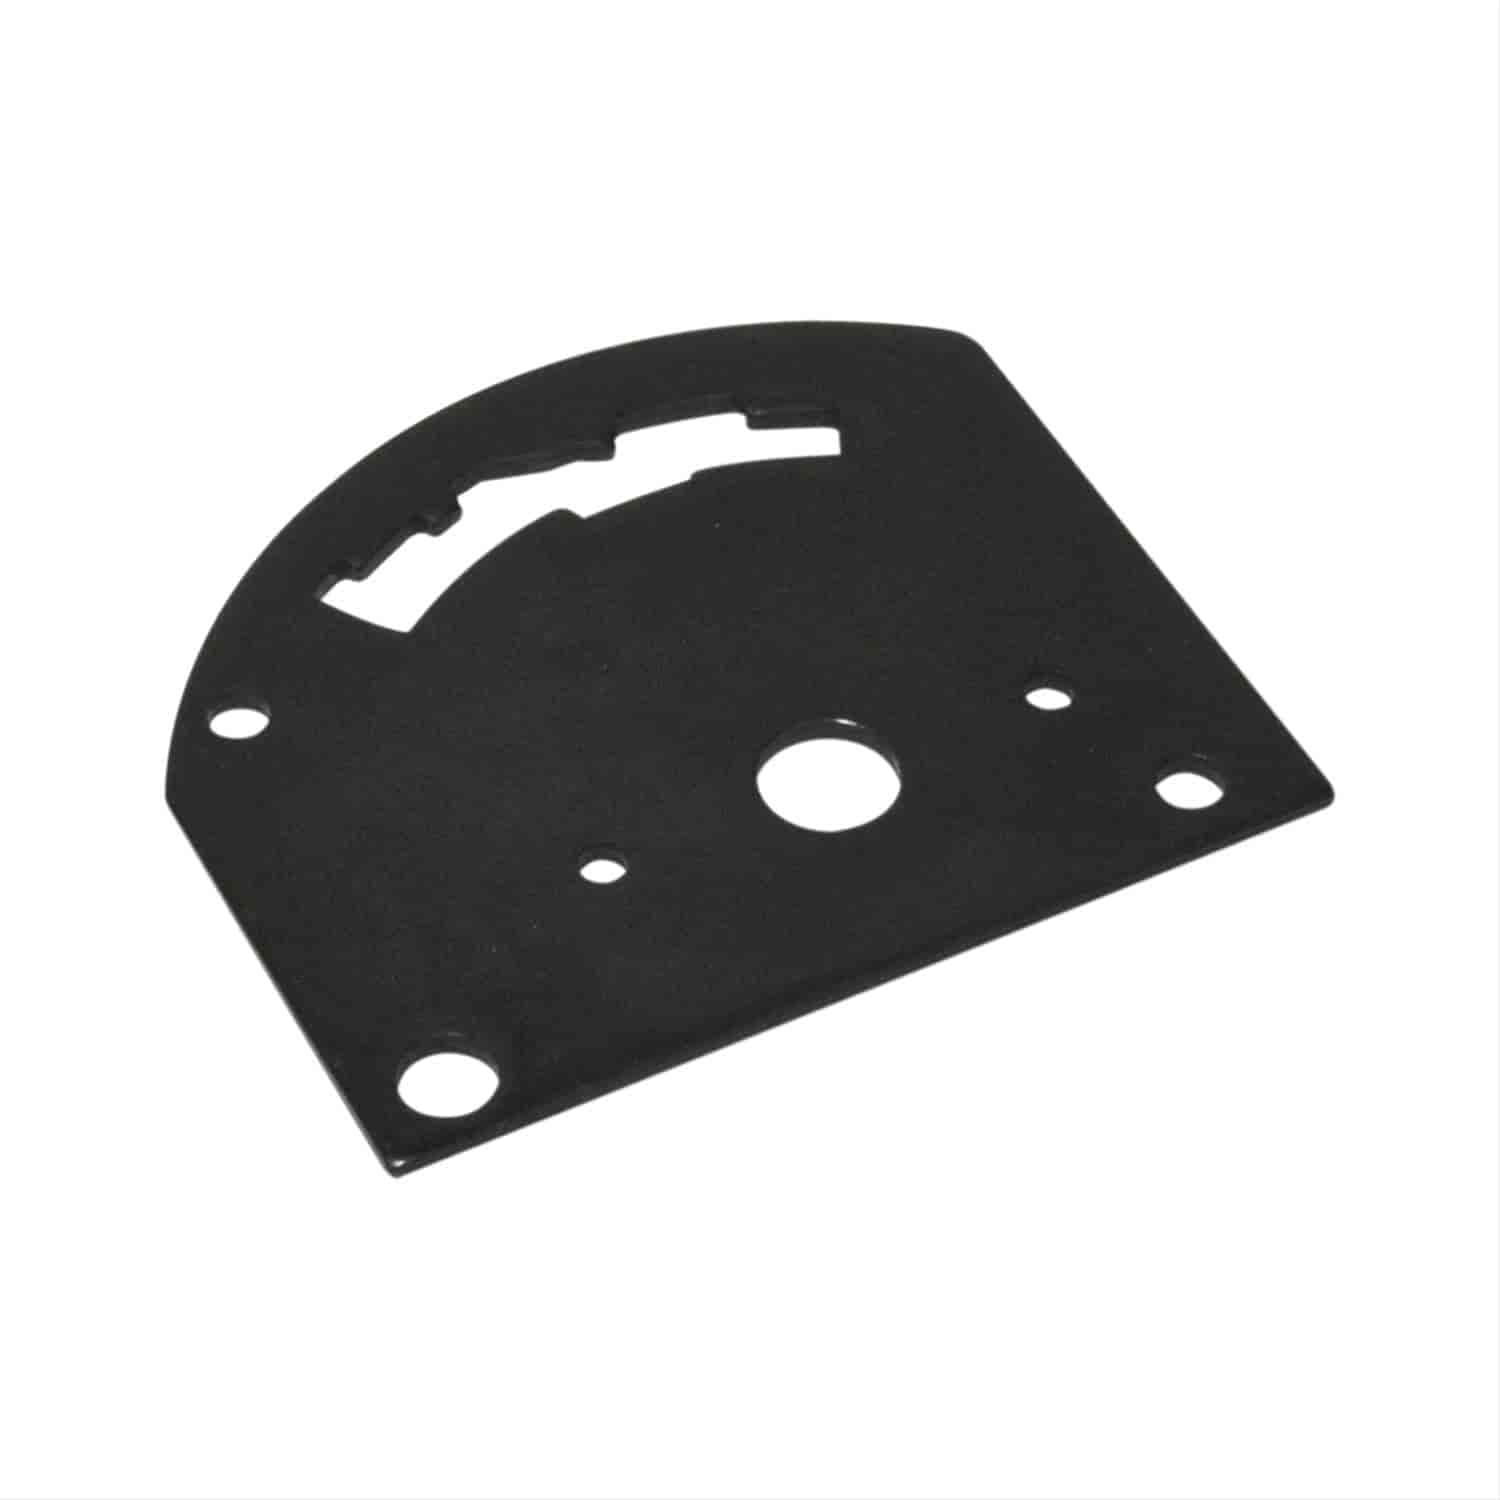 Replacement Pro Stick Shift Gate Plate 3-Speed Reverse